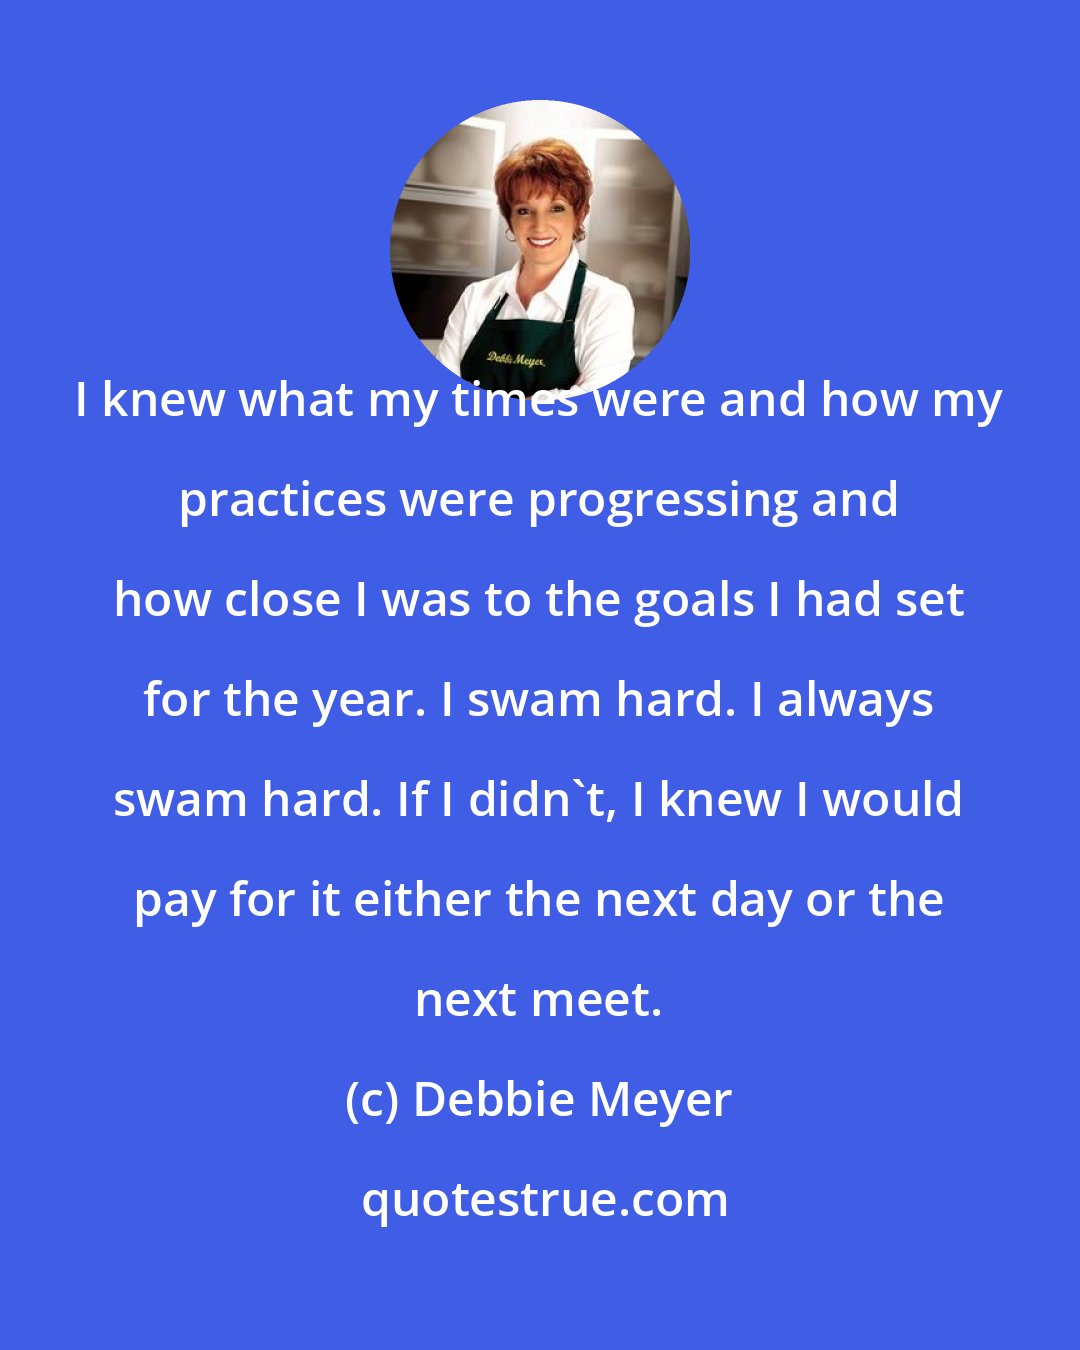 Debbie Meyer: I knew what my times were and how my practices were progressing and how close I was to the goals I had set for the year. I swam hard. I always swam hard. If I didn't, I knew I would pay for it either the next day or the next meet.